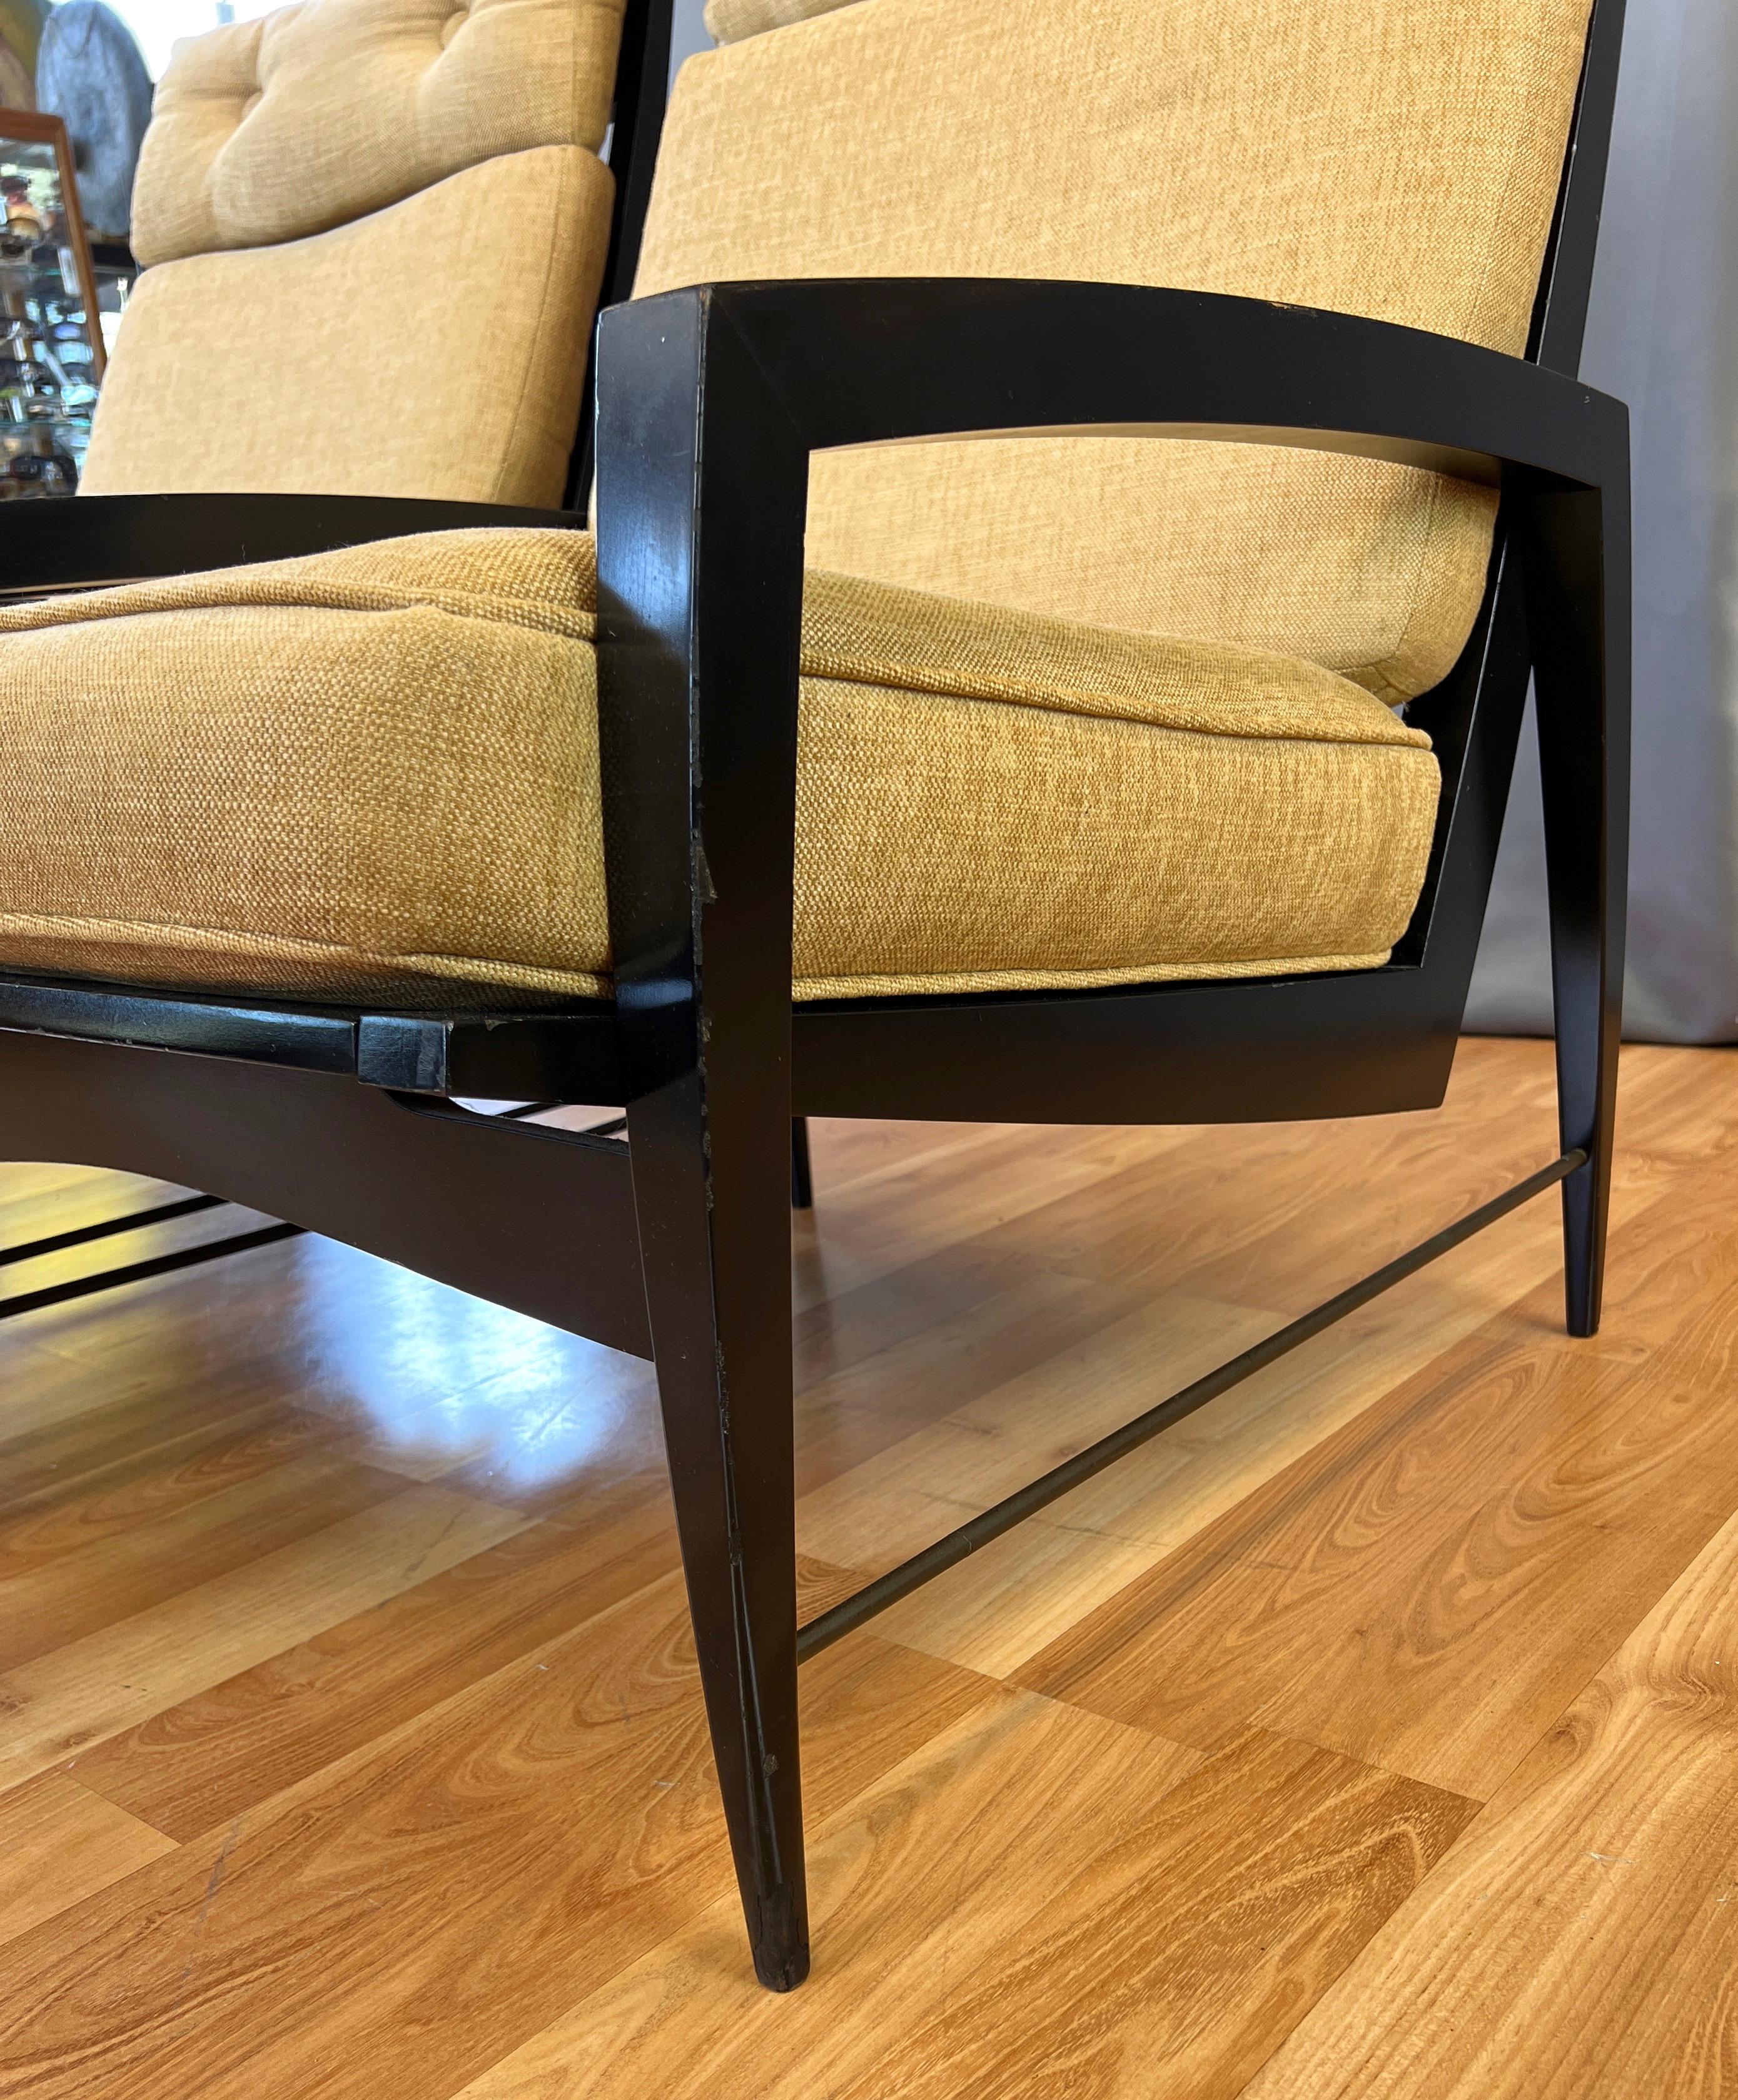 Pair of Dan Johnson for Selig Black Lacquered High-Back Lounge Chairs, 1950s For Sale 7